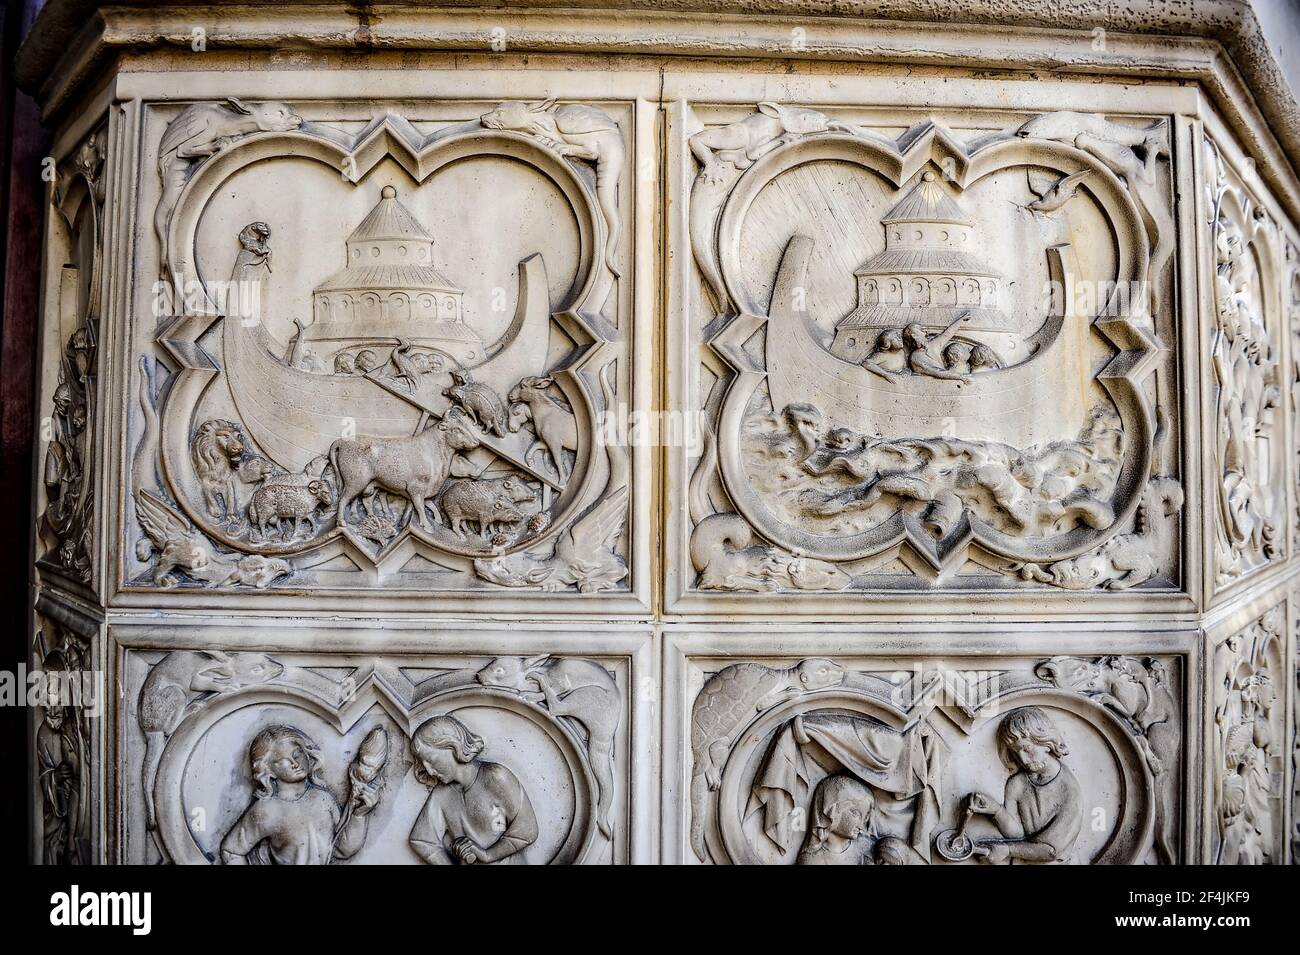 Paris, France - July 18, 2019: Bas relief at the Sainte Chapelle royal chapel in Paris depicting the Armenian cathedral of Zvartnots on Noah's Ark Stock Photo